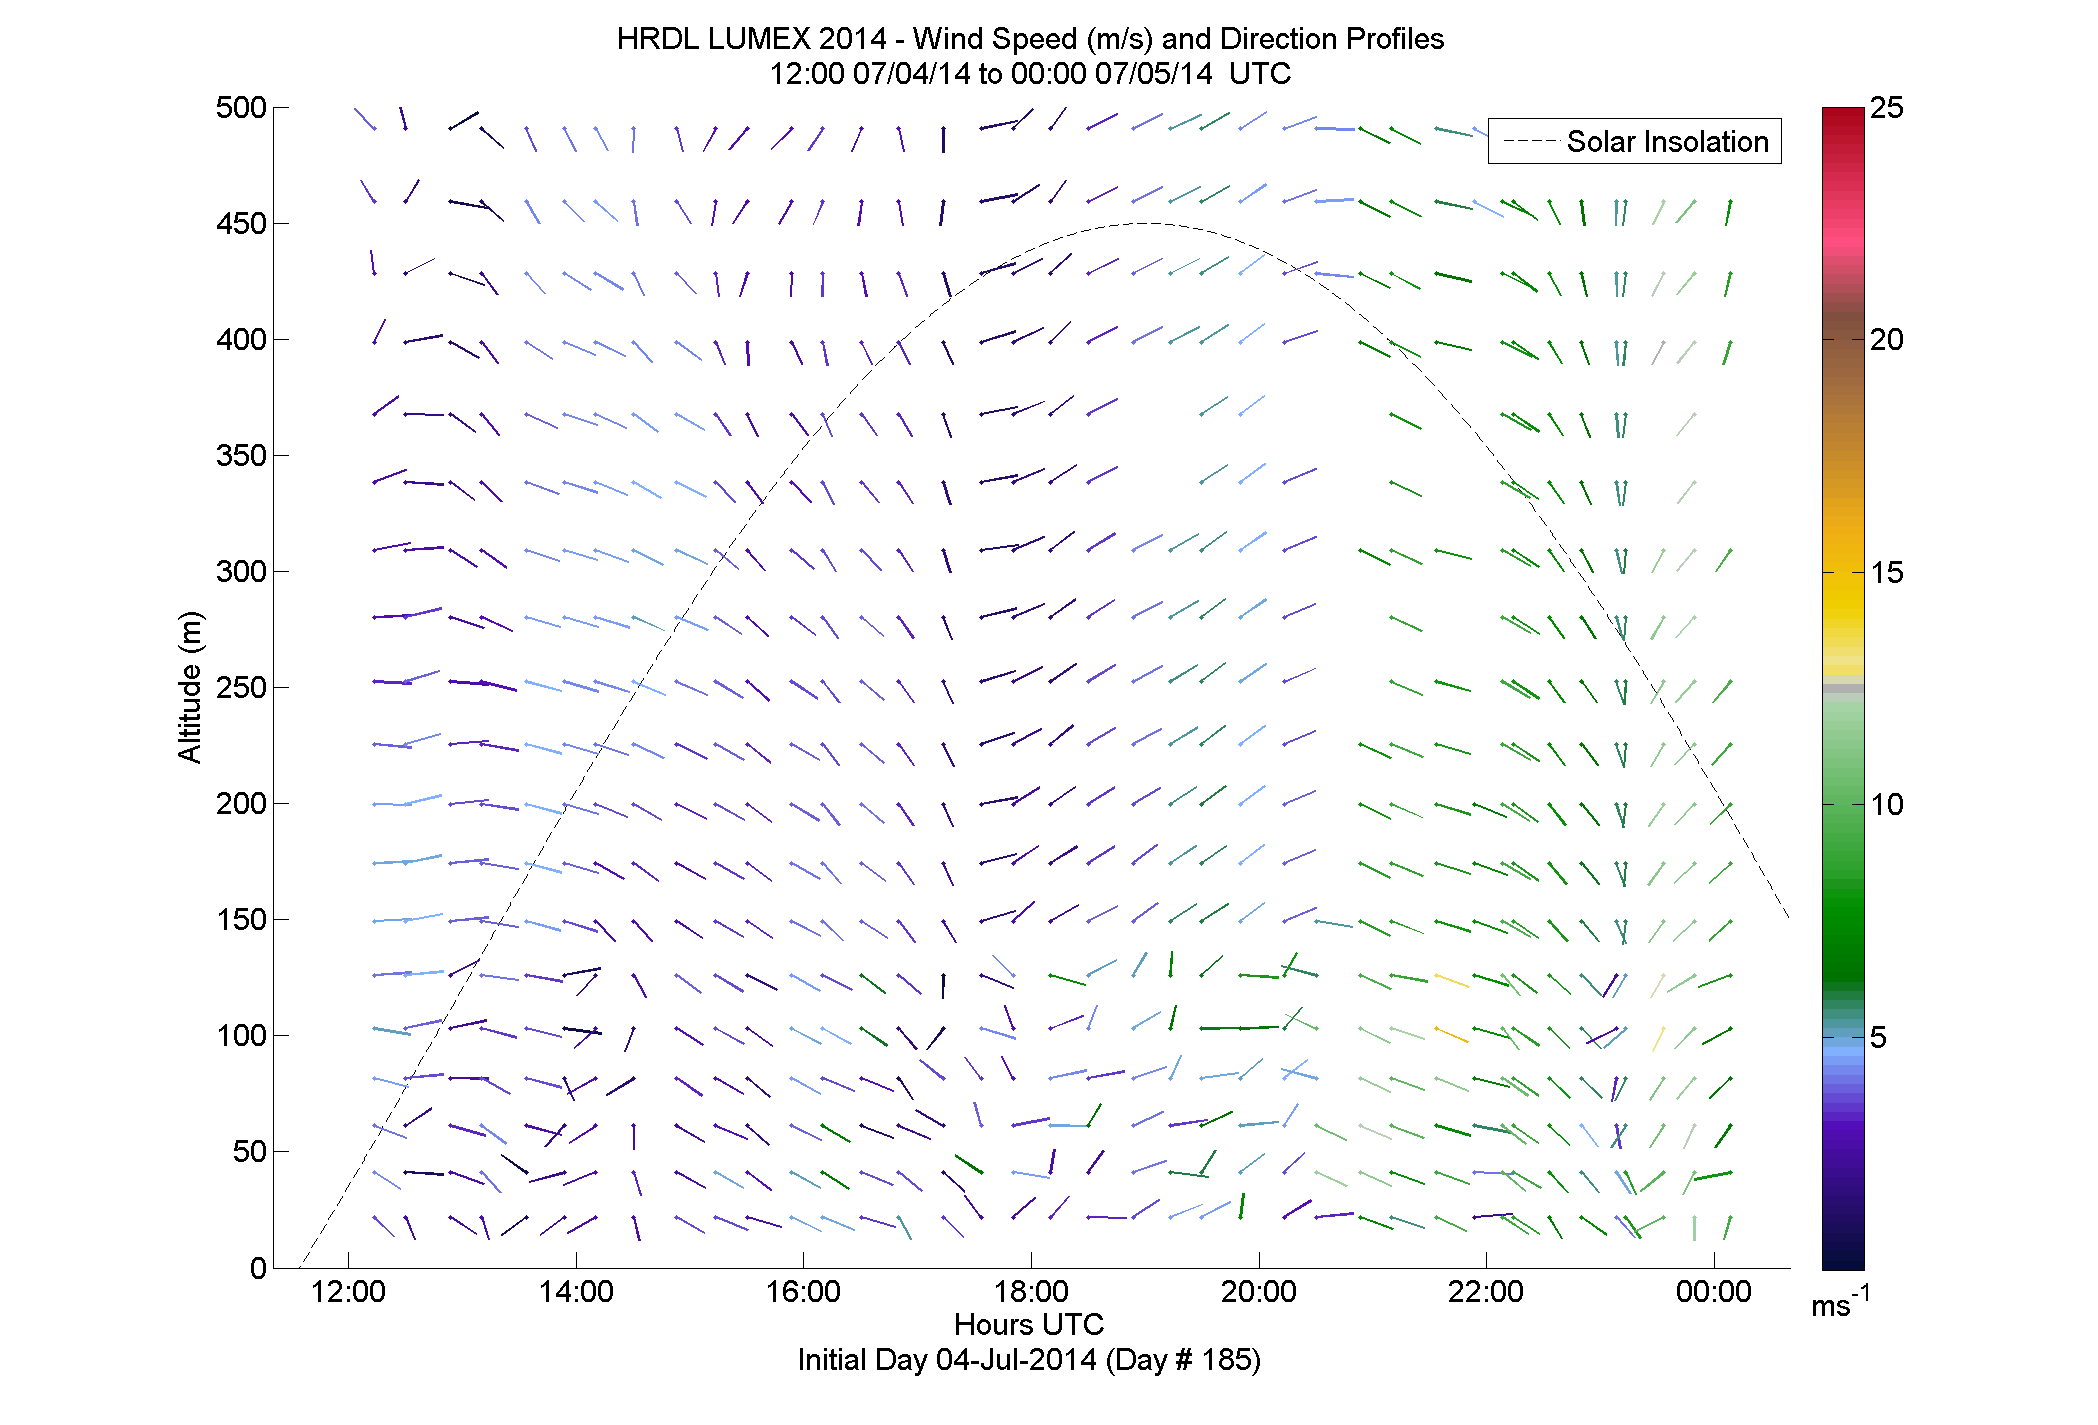 HRDL speed and direction profile - July 4 pm